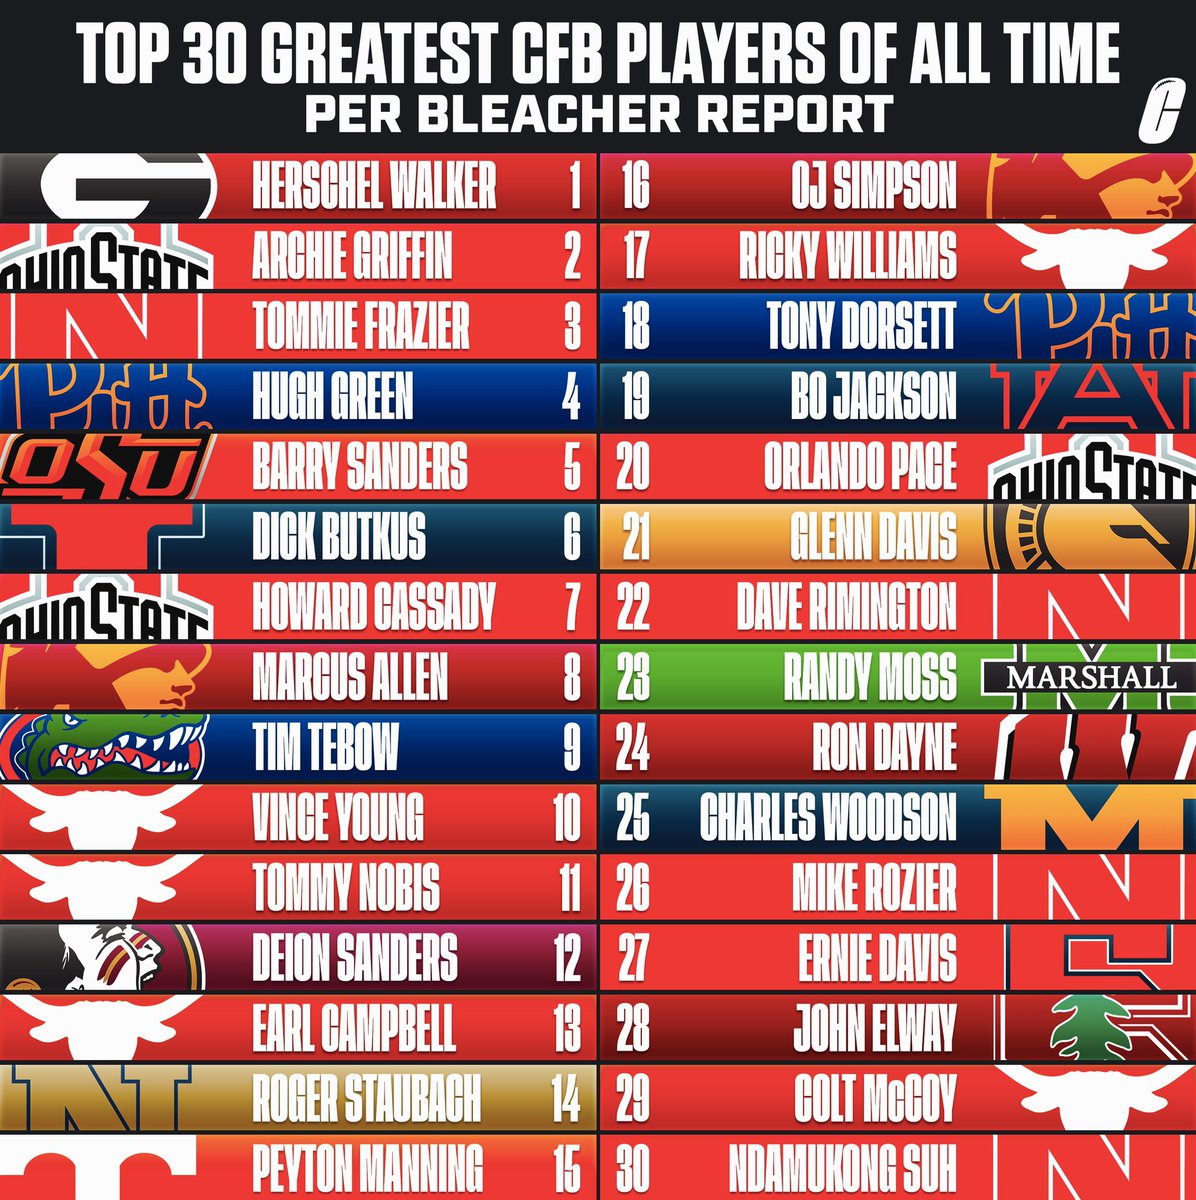 The 30 best college football players of all time per Bleacher Report. What would you change?